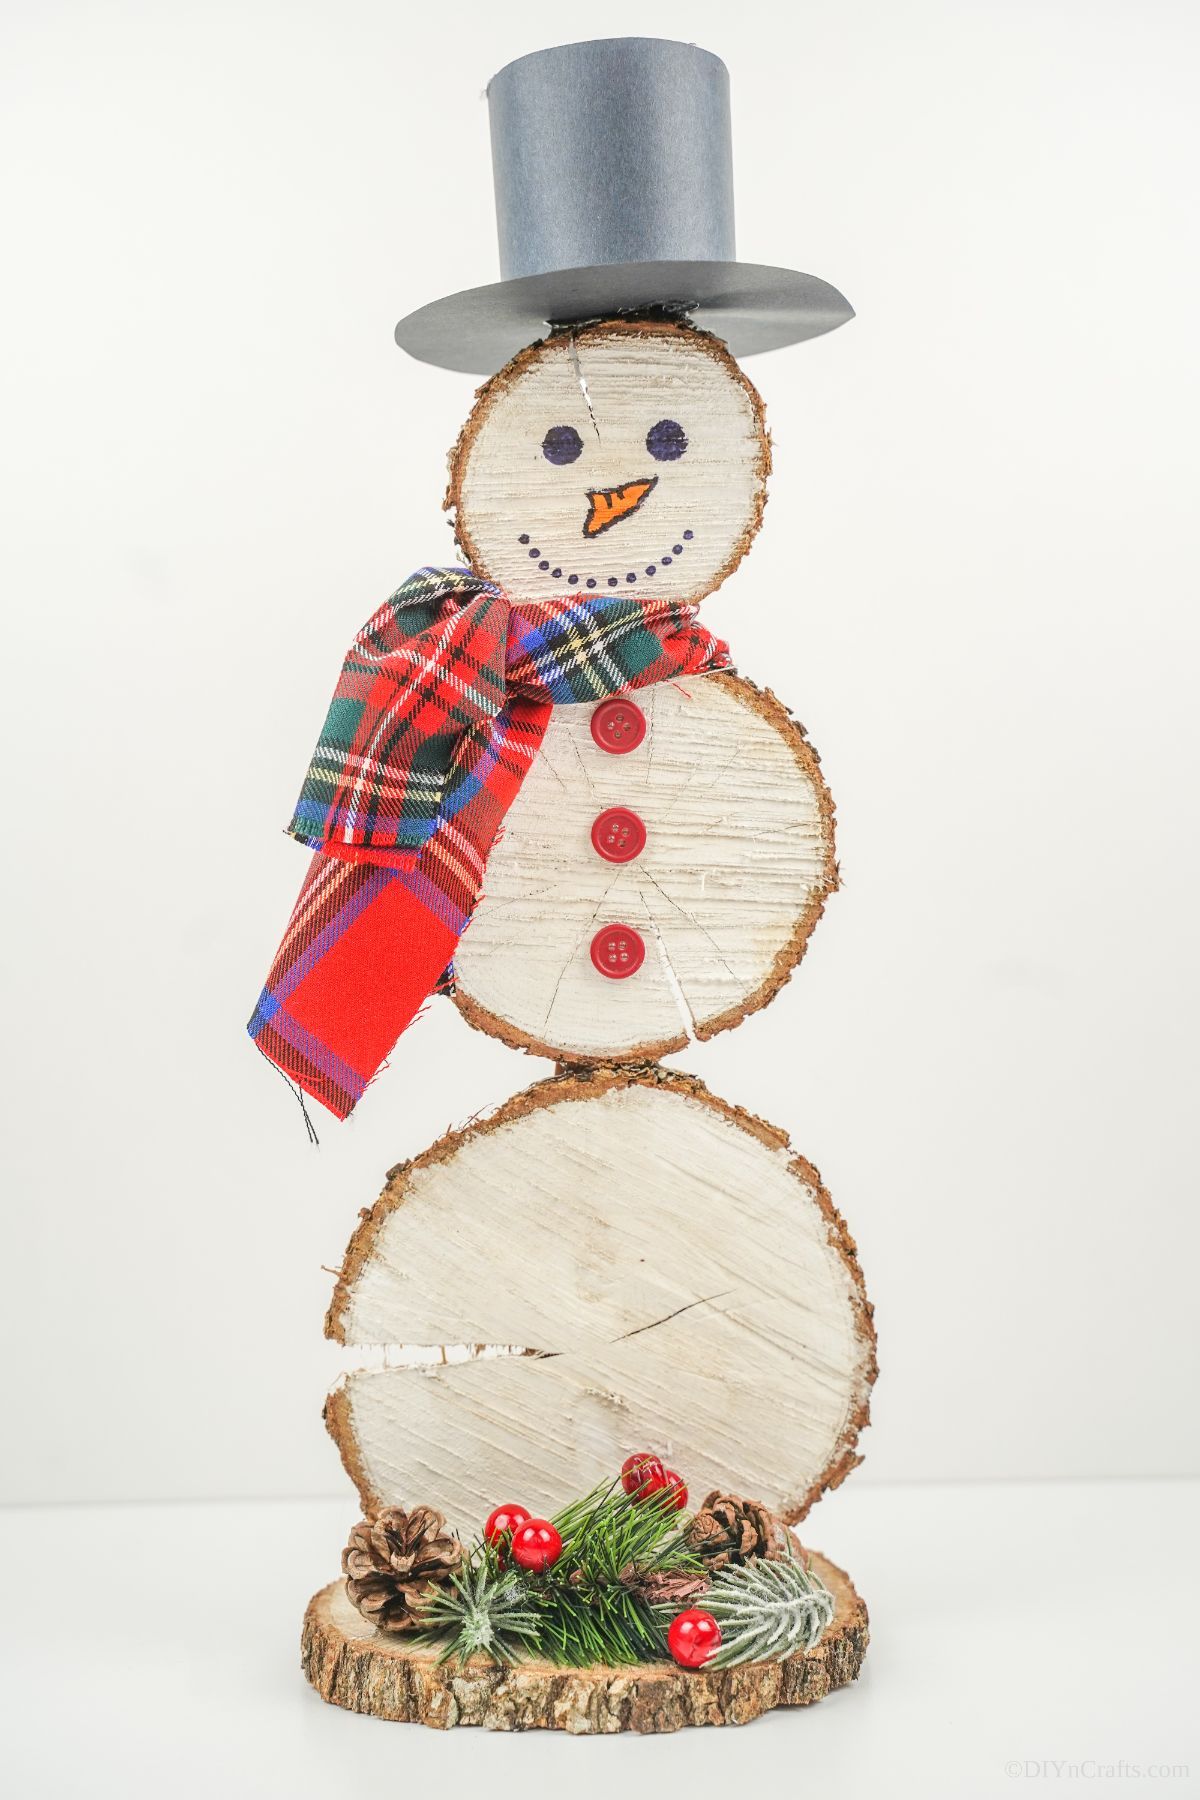 wood slice snowman on white table